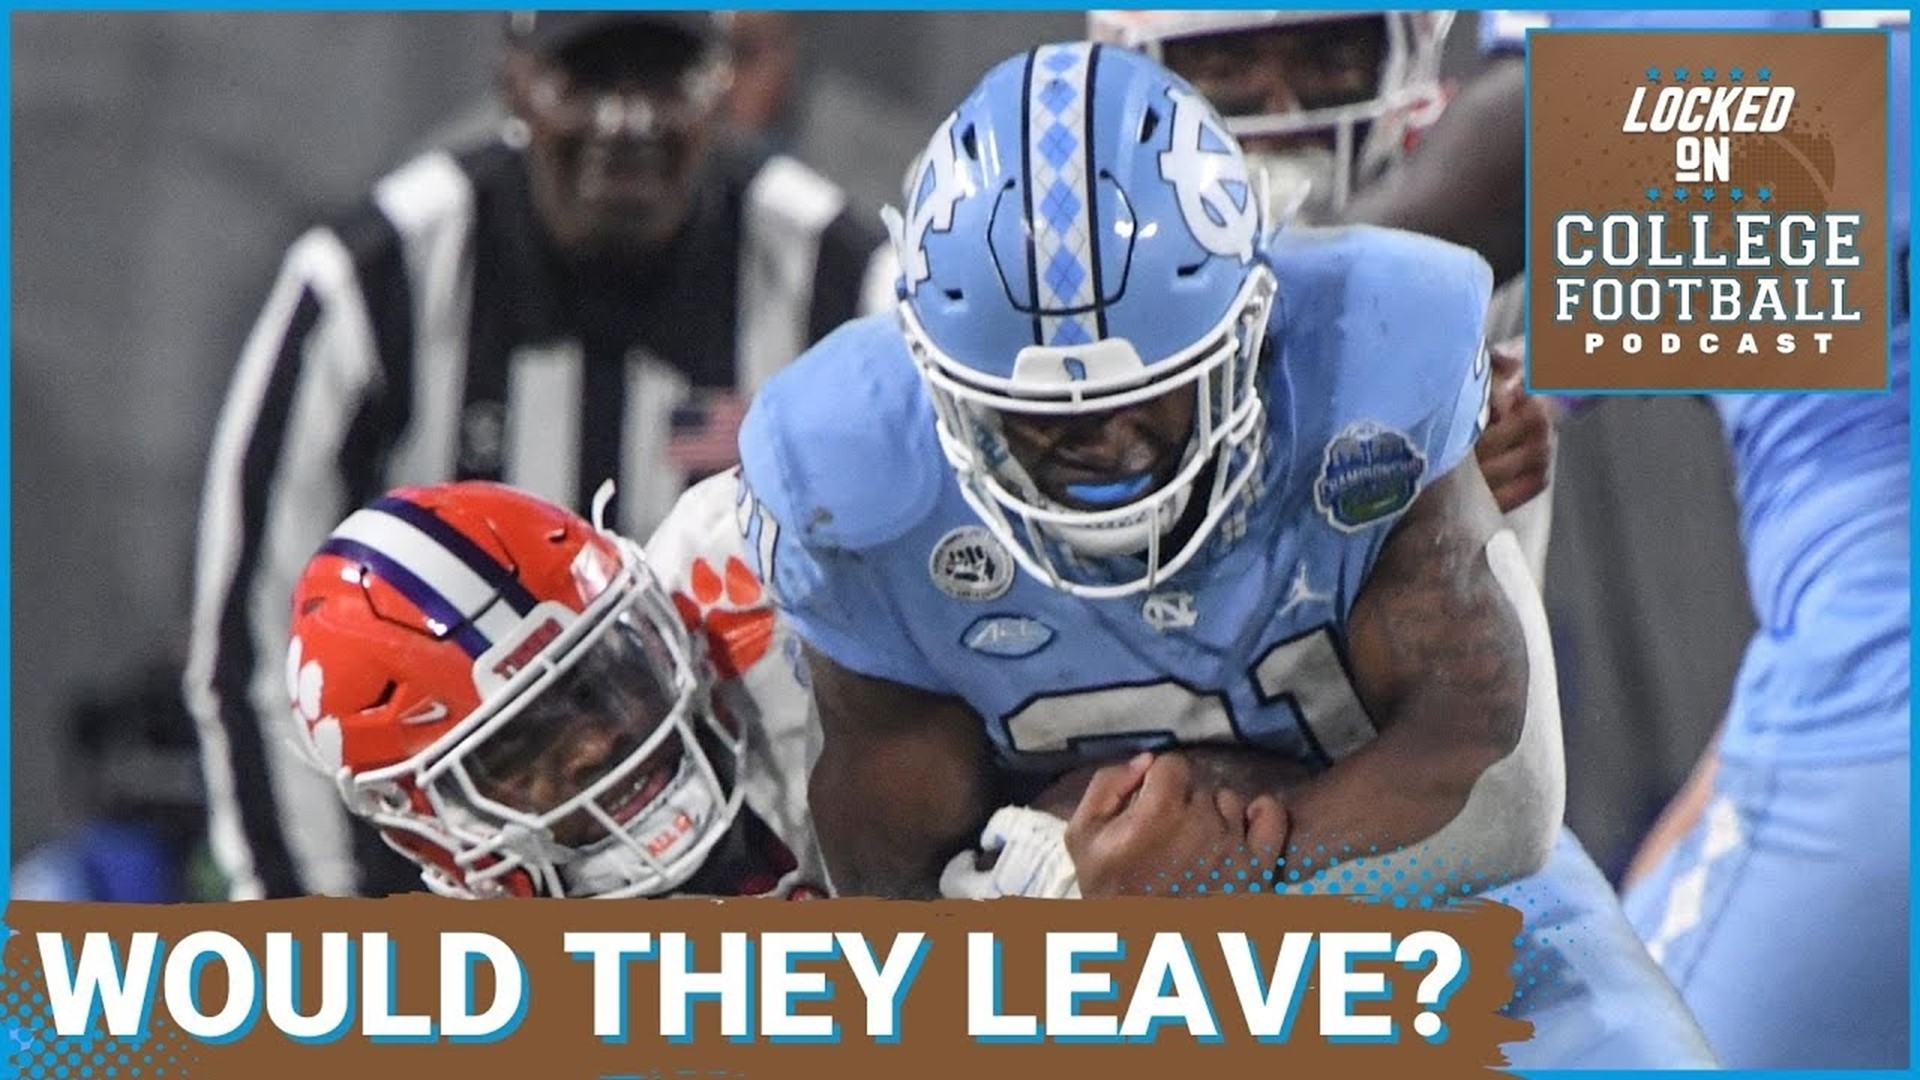 North Carolina has been discussed as a potential target in realignment amidst looming conversations about the long-term viability of the ACC.